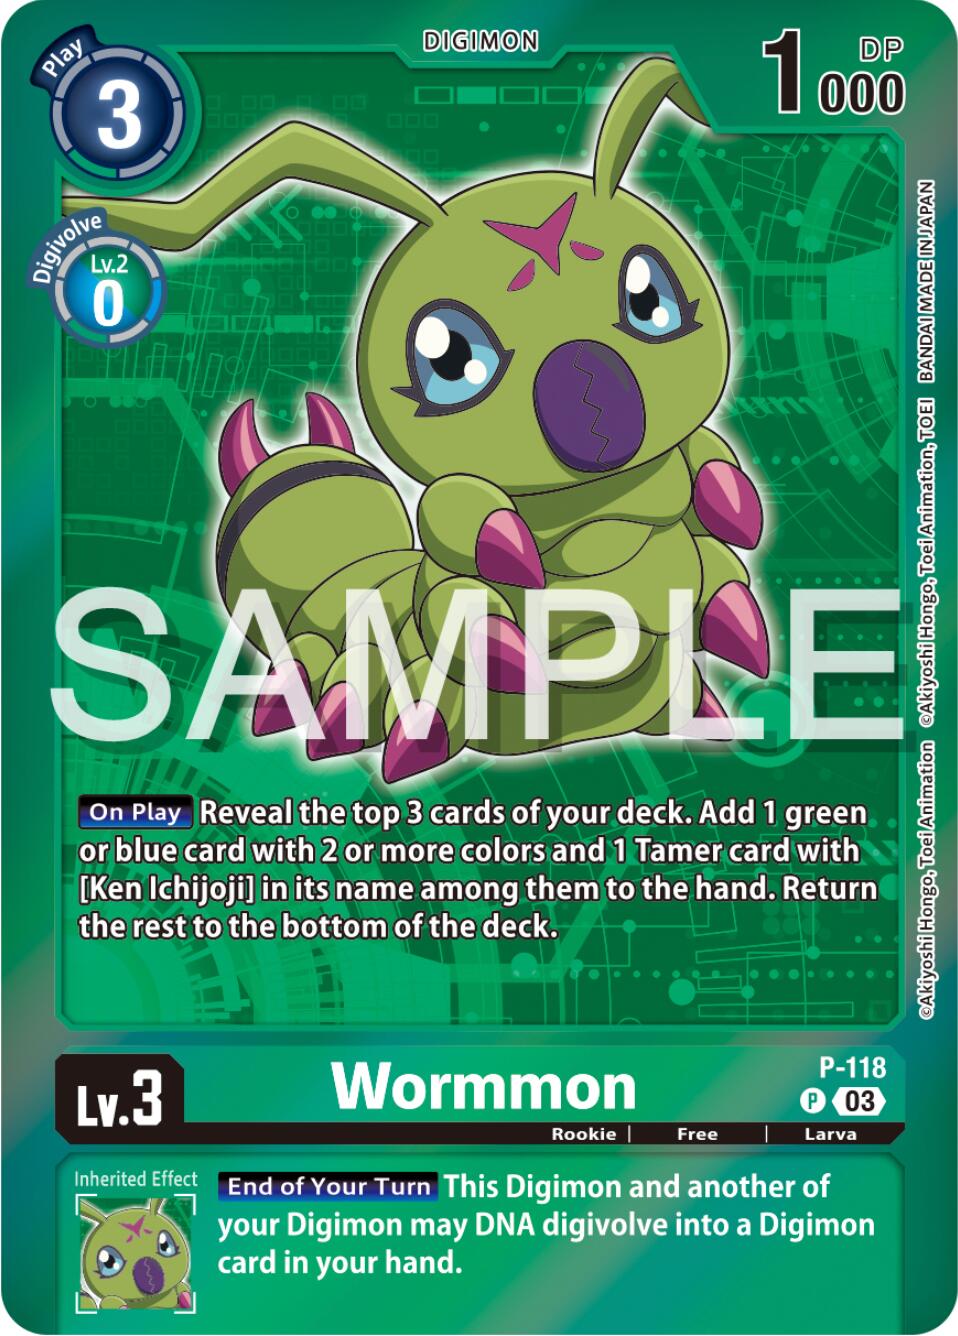 Wormmon [P-118] (Digimon Adventure Box 2024) [Promotional Cards] | Shuffle n Cut Hobbies & Games